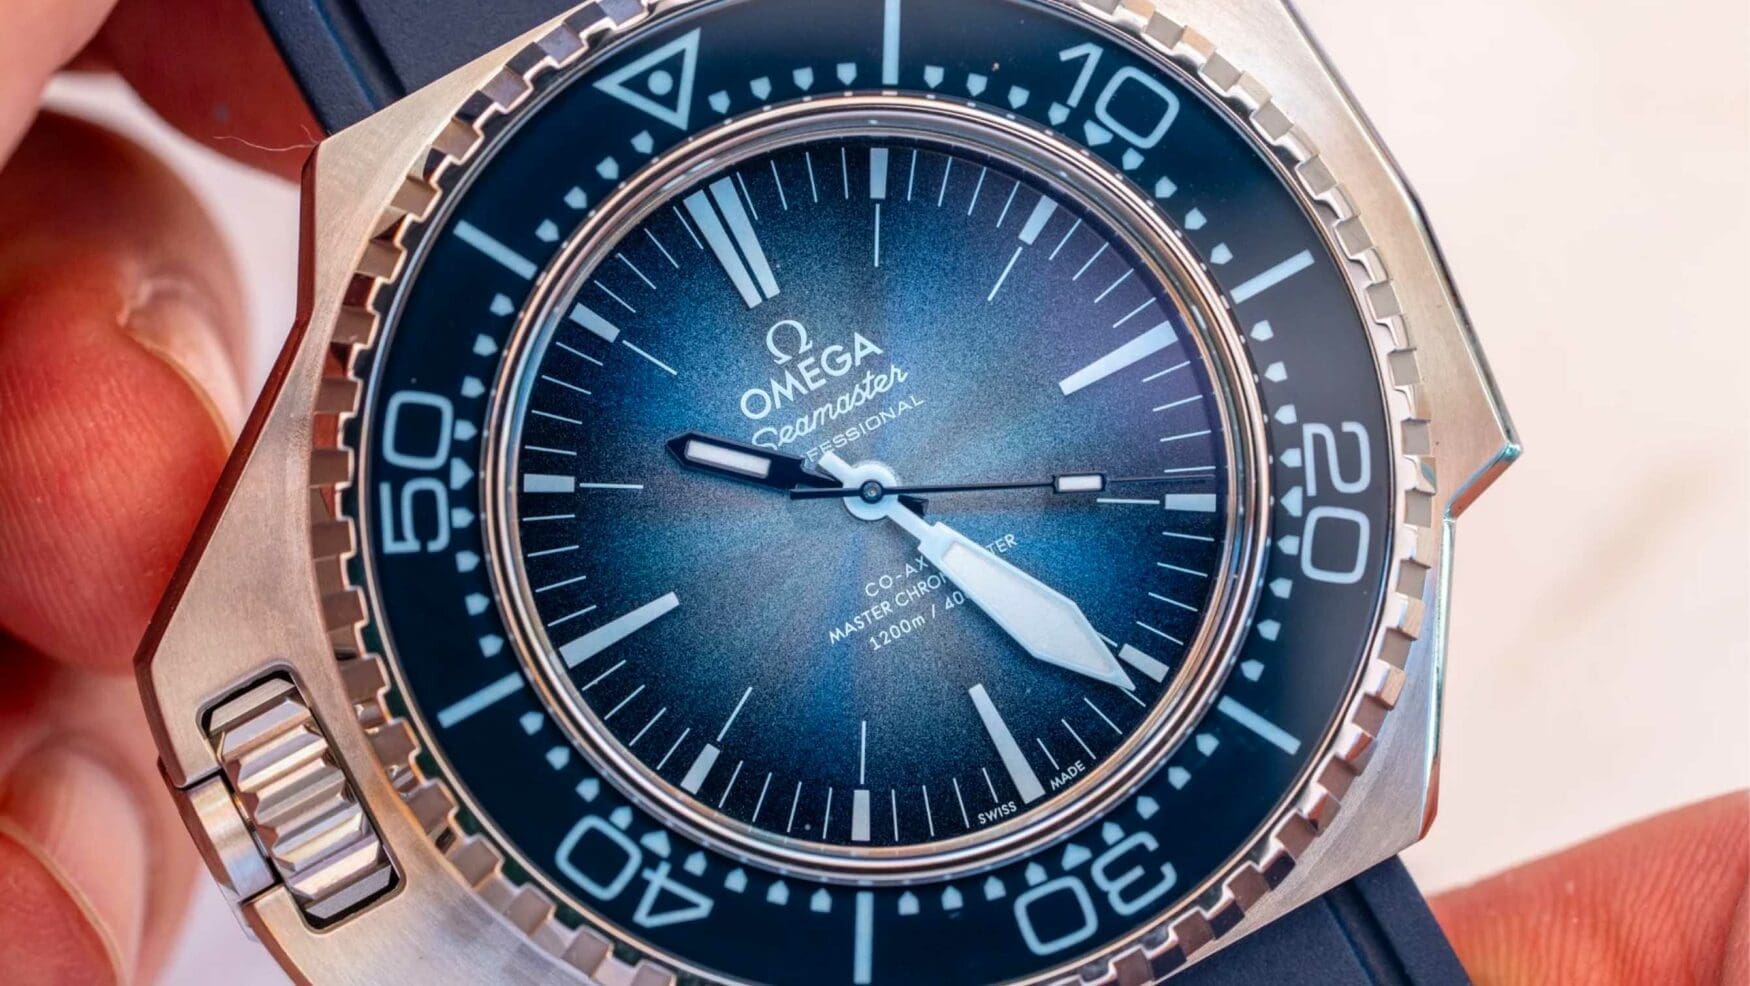 Celebrating the Seamaster, the Paris Olympics and new tech – the best of Omega in 2023